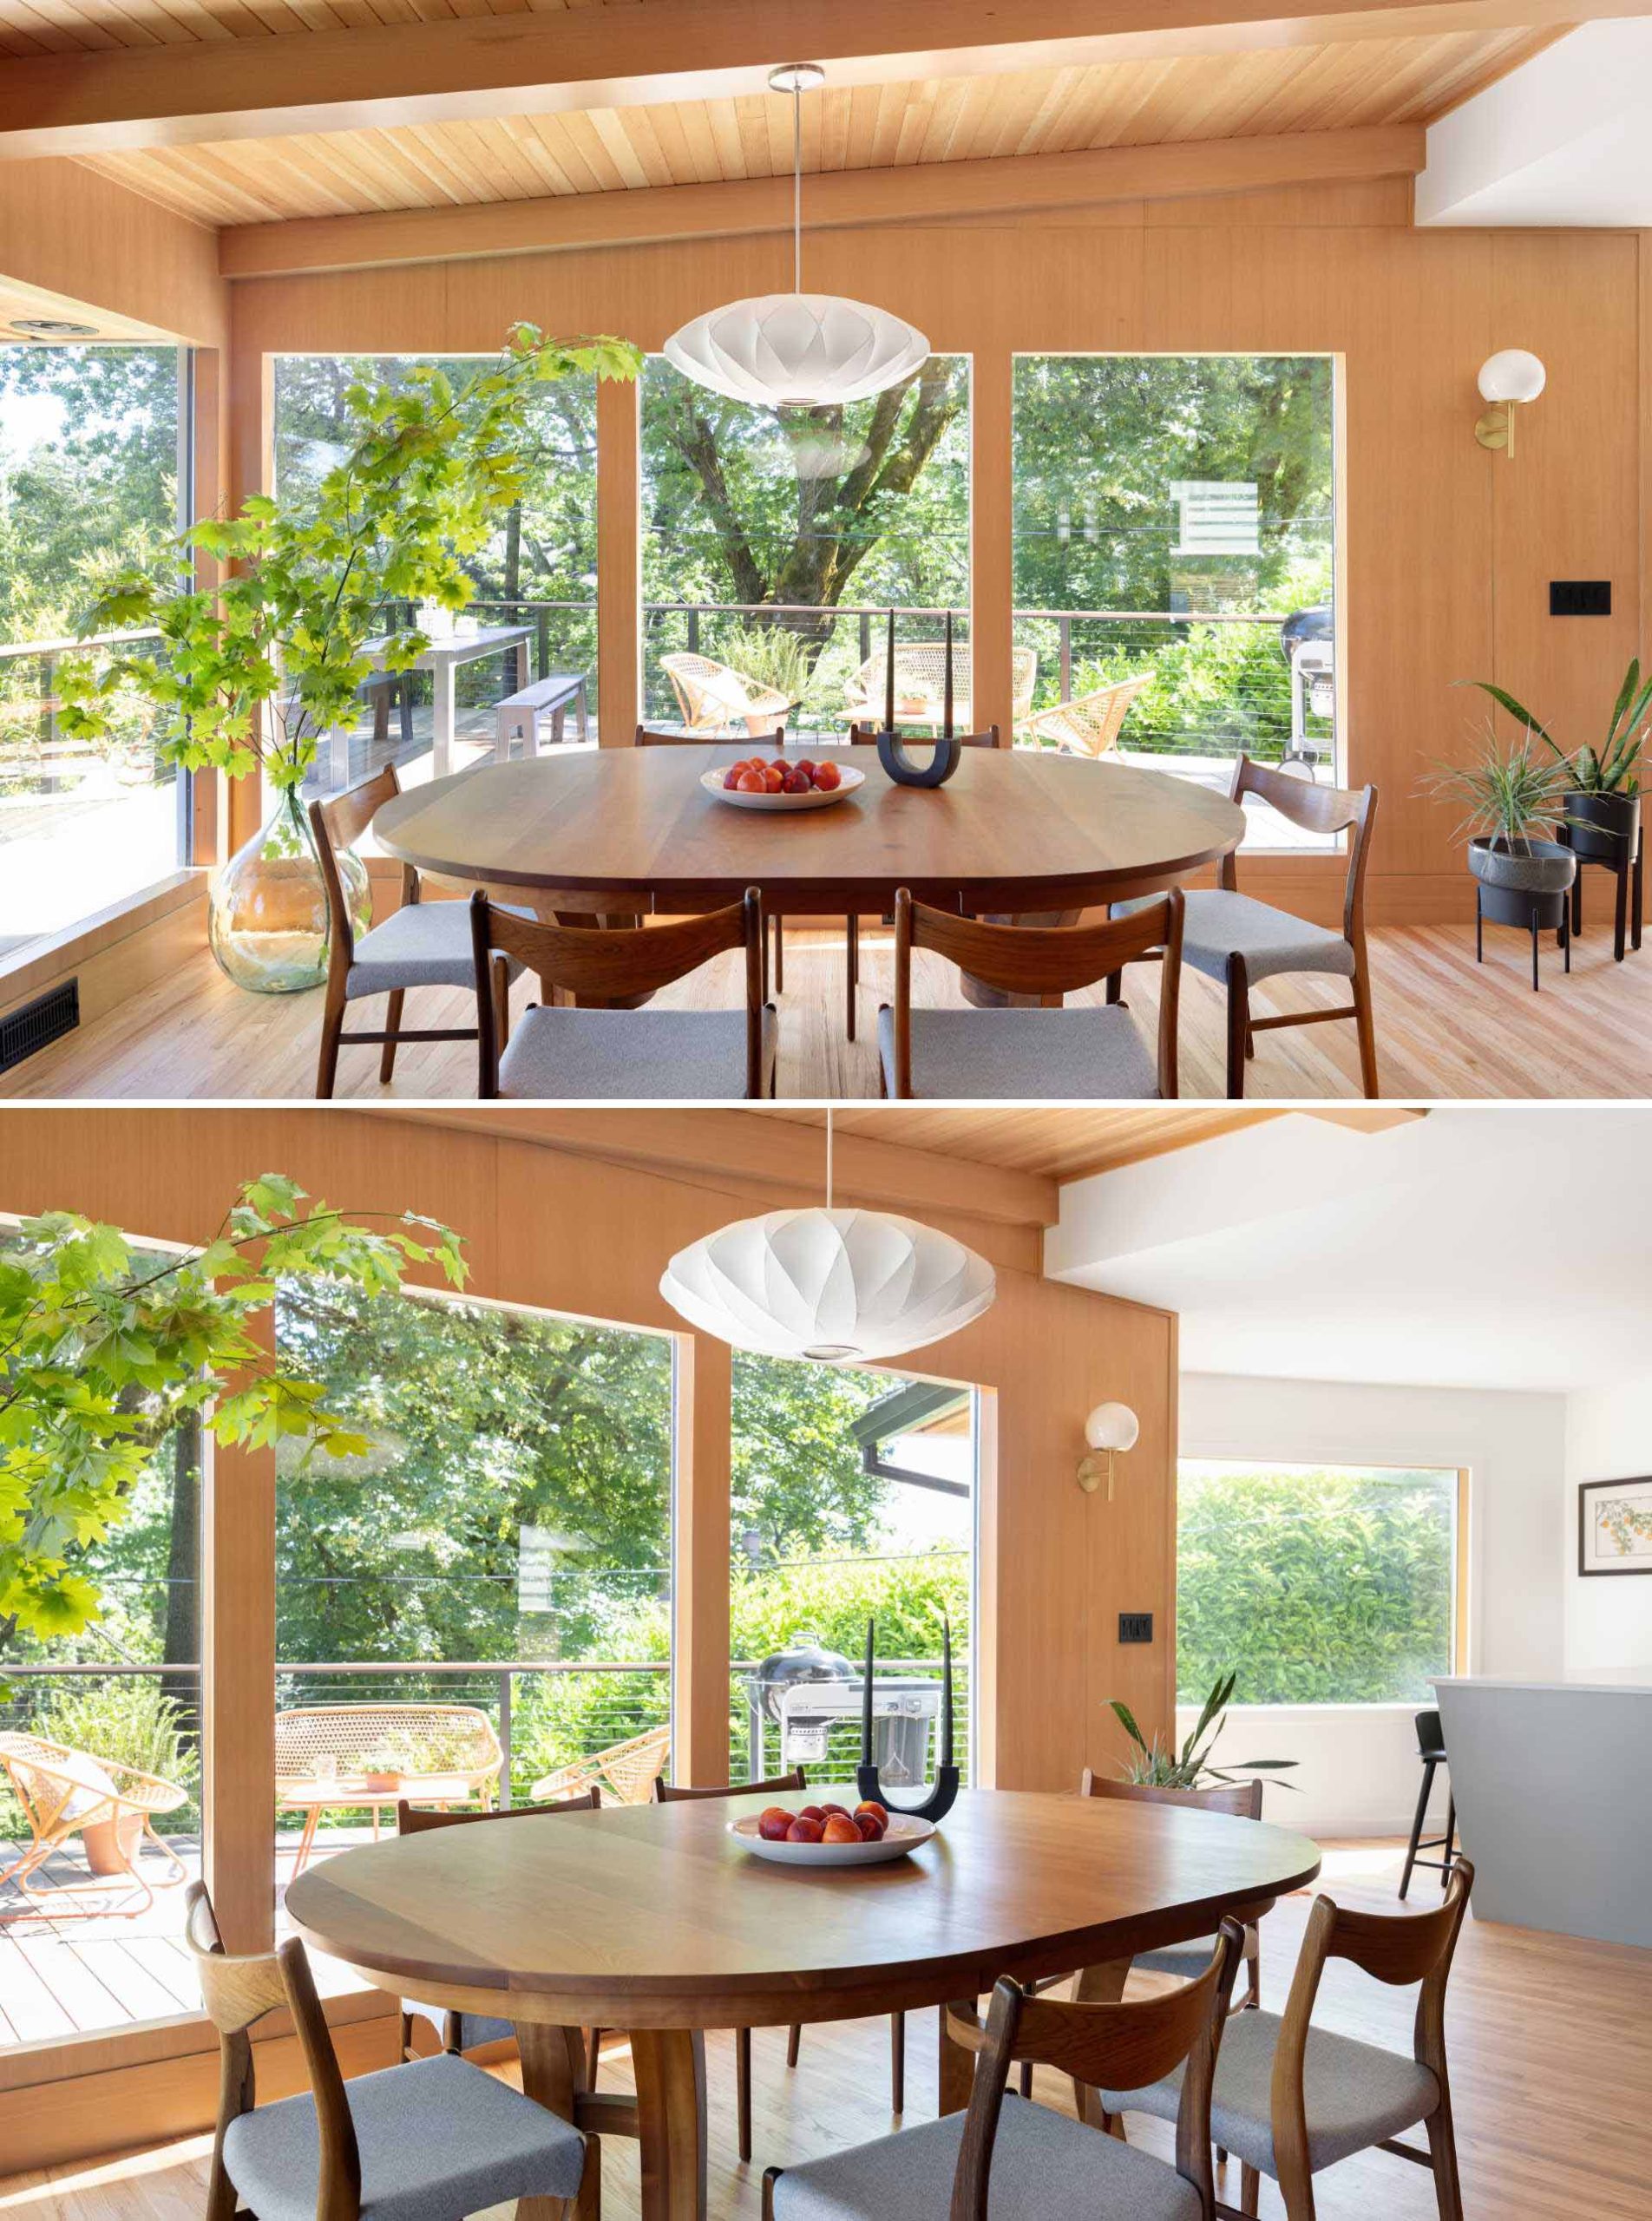 This updated dining room has now been positioned by the windows and includes an oval wood dining table.